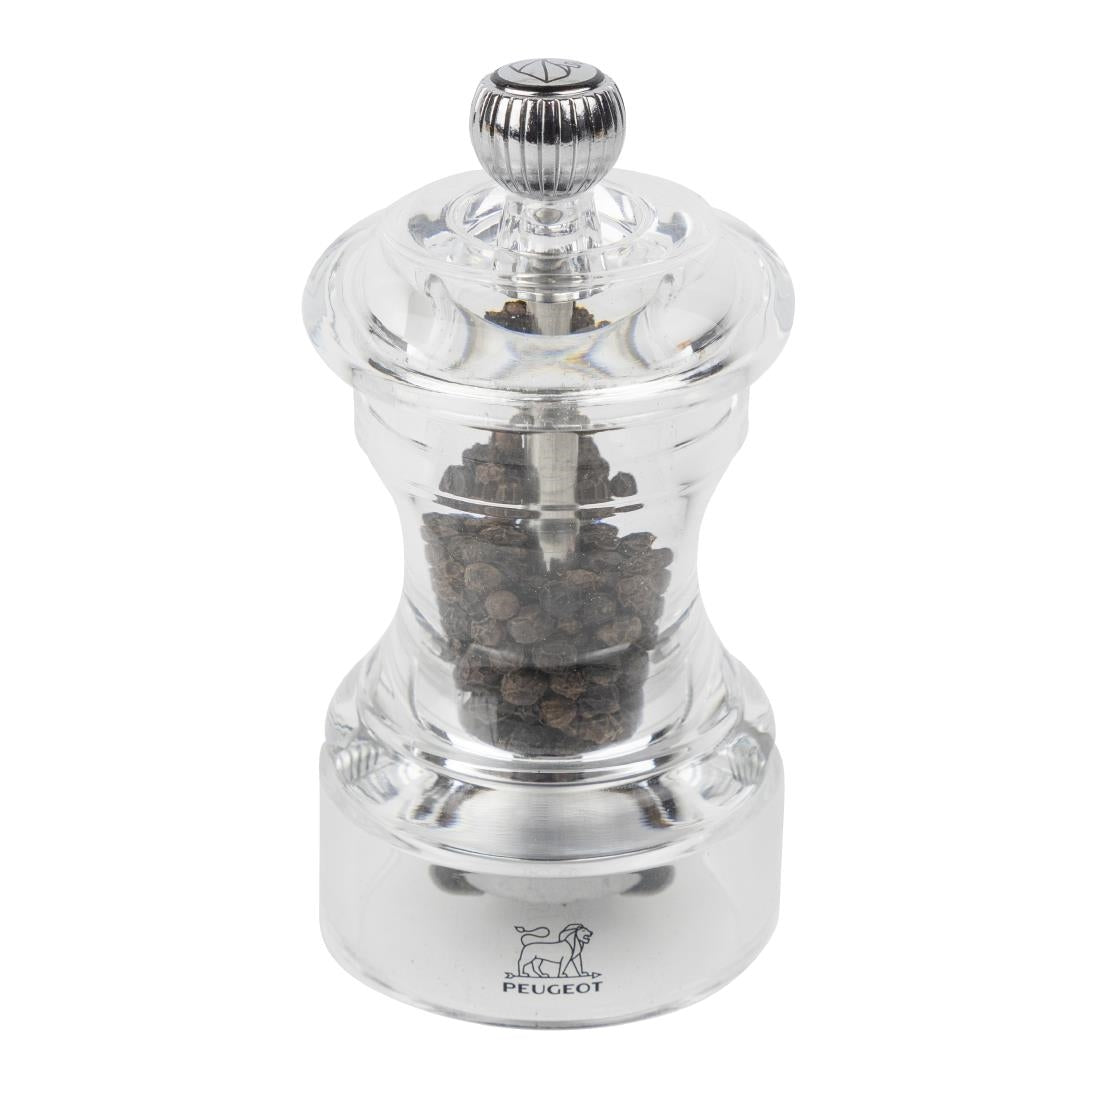 CU560 Peugeot Bistro Acrylic Pepper Mill 4in JD Catering Equipment Solutions Ltd